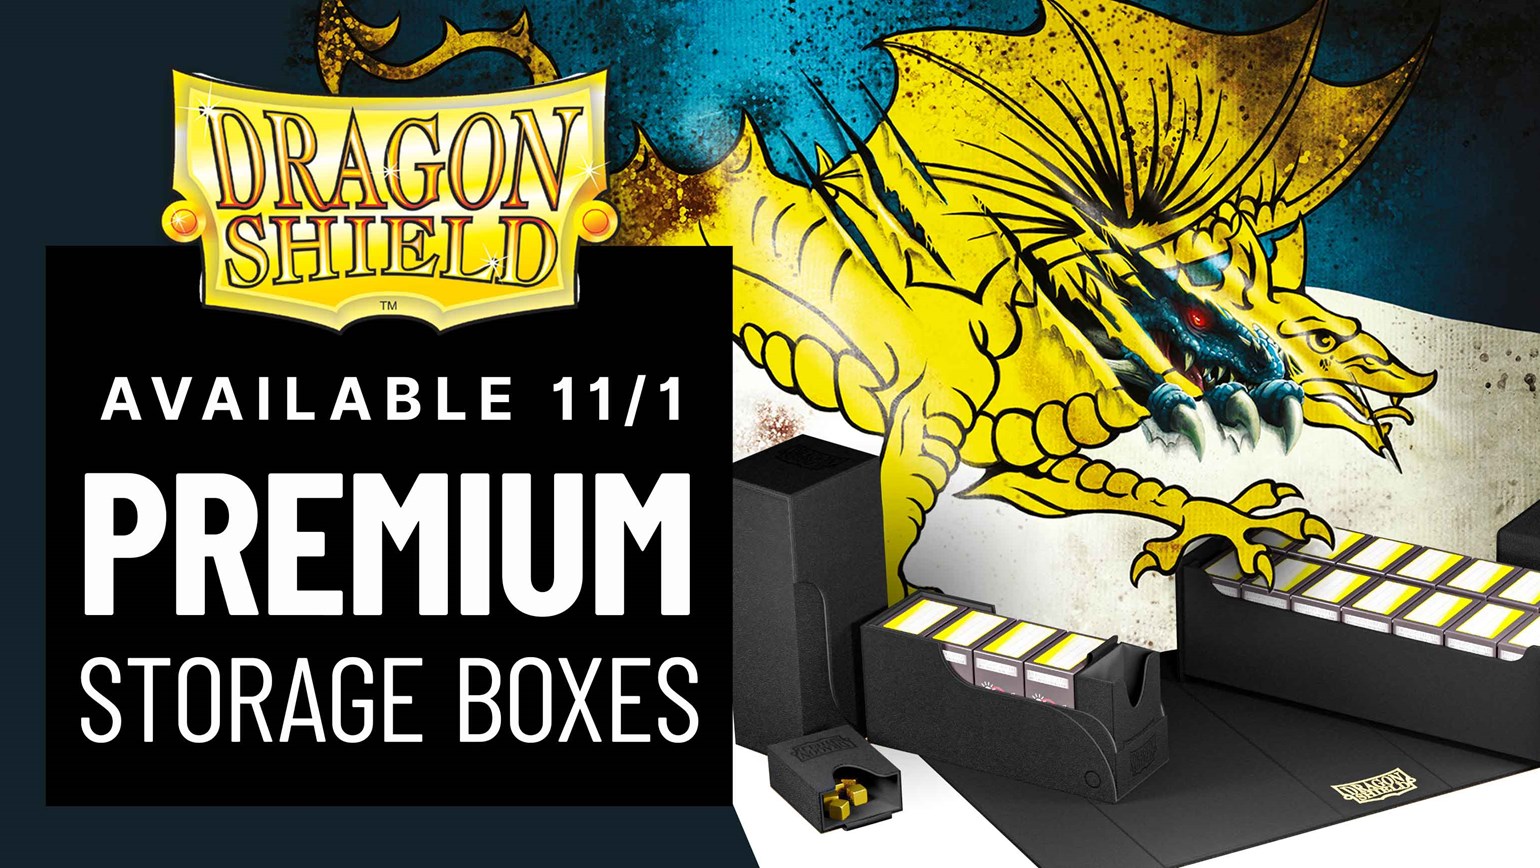 New Premium Storage Boxes from Dragon Shield Arrive Friday, 11/1